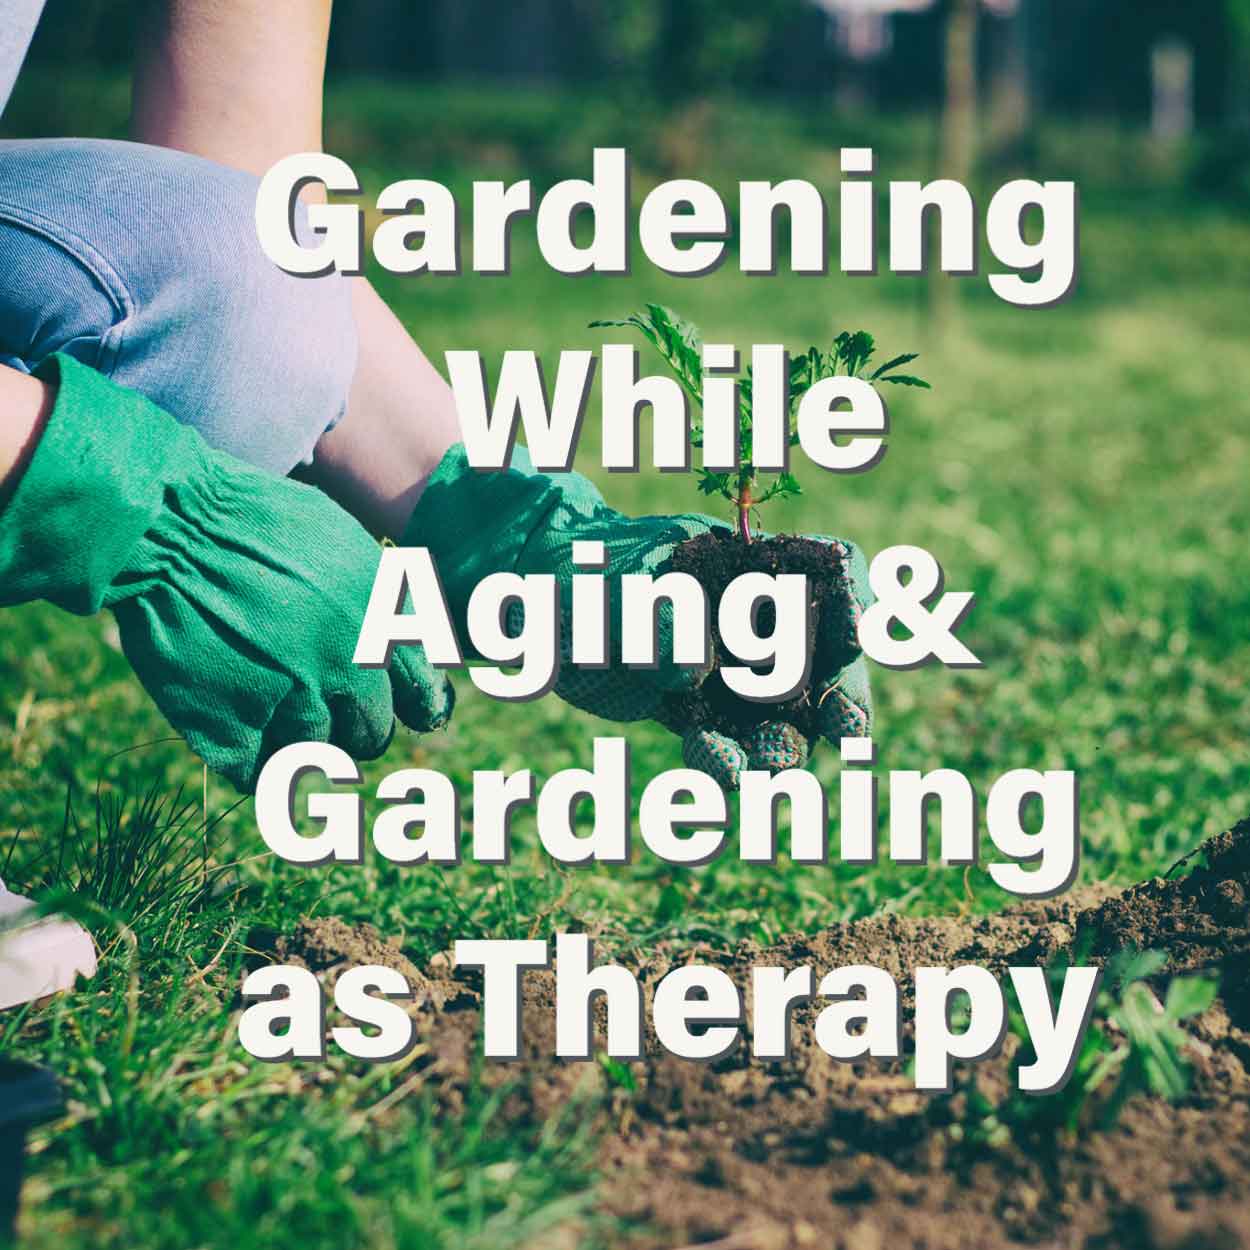 Gardening While Aging” AND “Gardening as Therapy